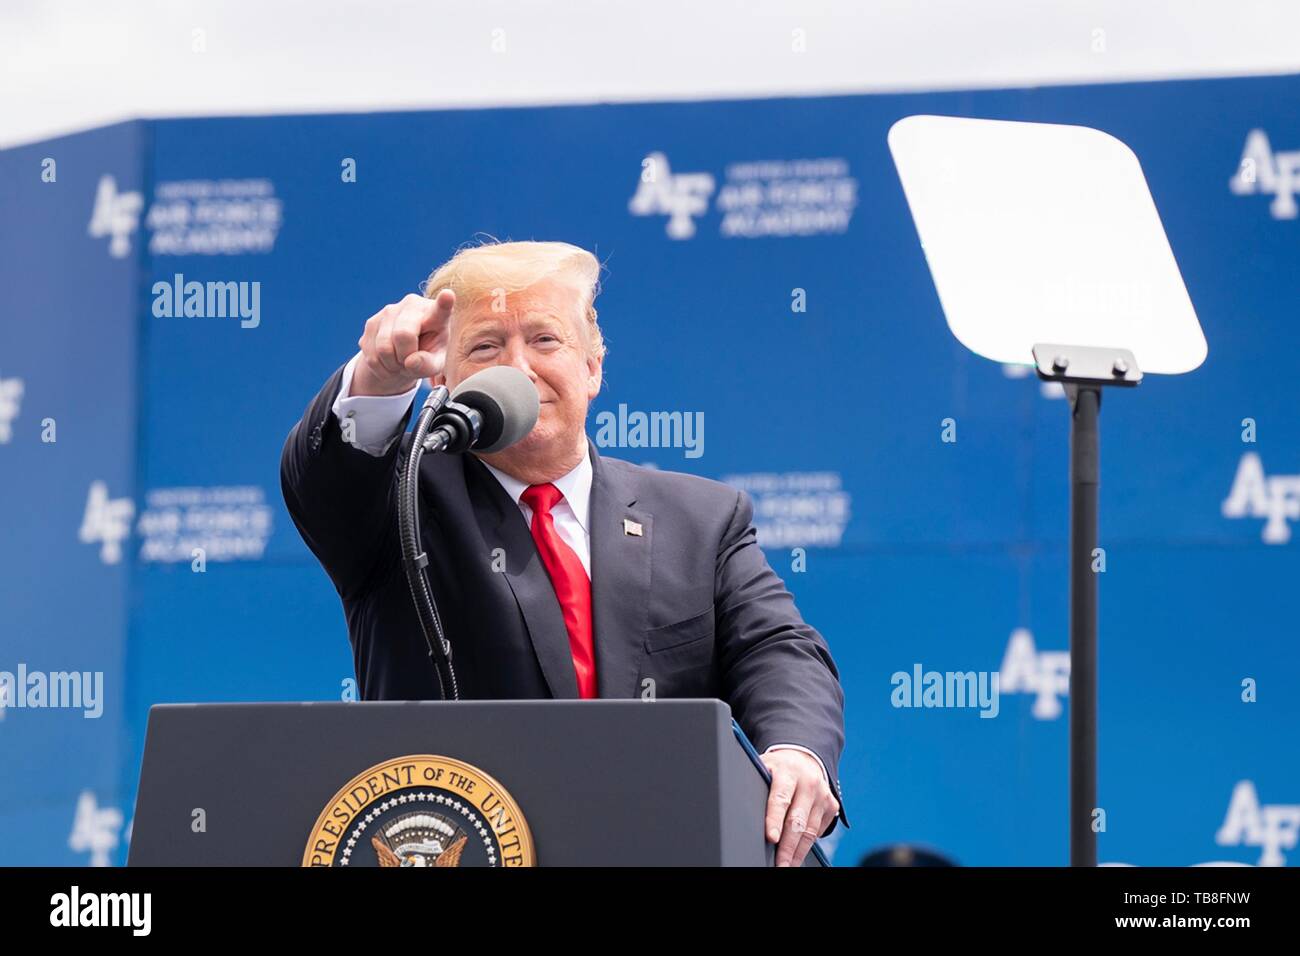 U.S President Donald Trump recognizes Cadet Parker Hammond during the U.S. Air Force Academy Graduation Ceremony at the USAF Academy Falcon Stadium May 30, 2019 in Colorado Springs, Colorado. Cadet Hammond battled cancer while attending the academy. Credit: Planetpix/Alamy Live News Stock Photo